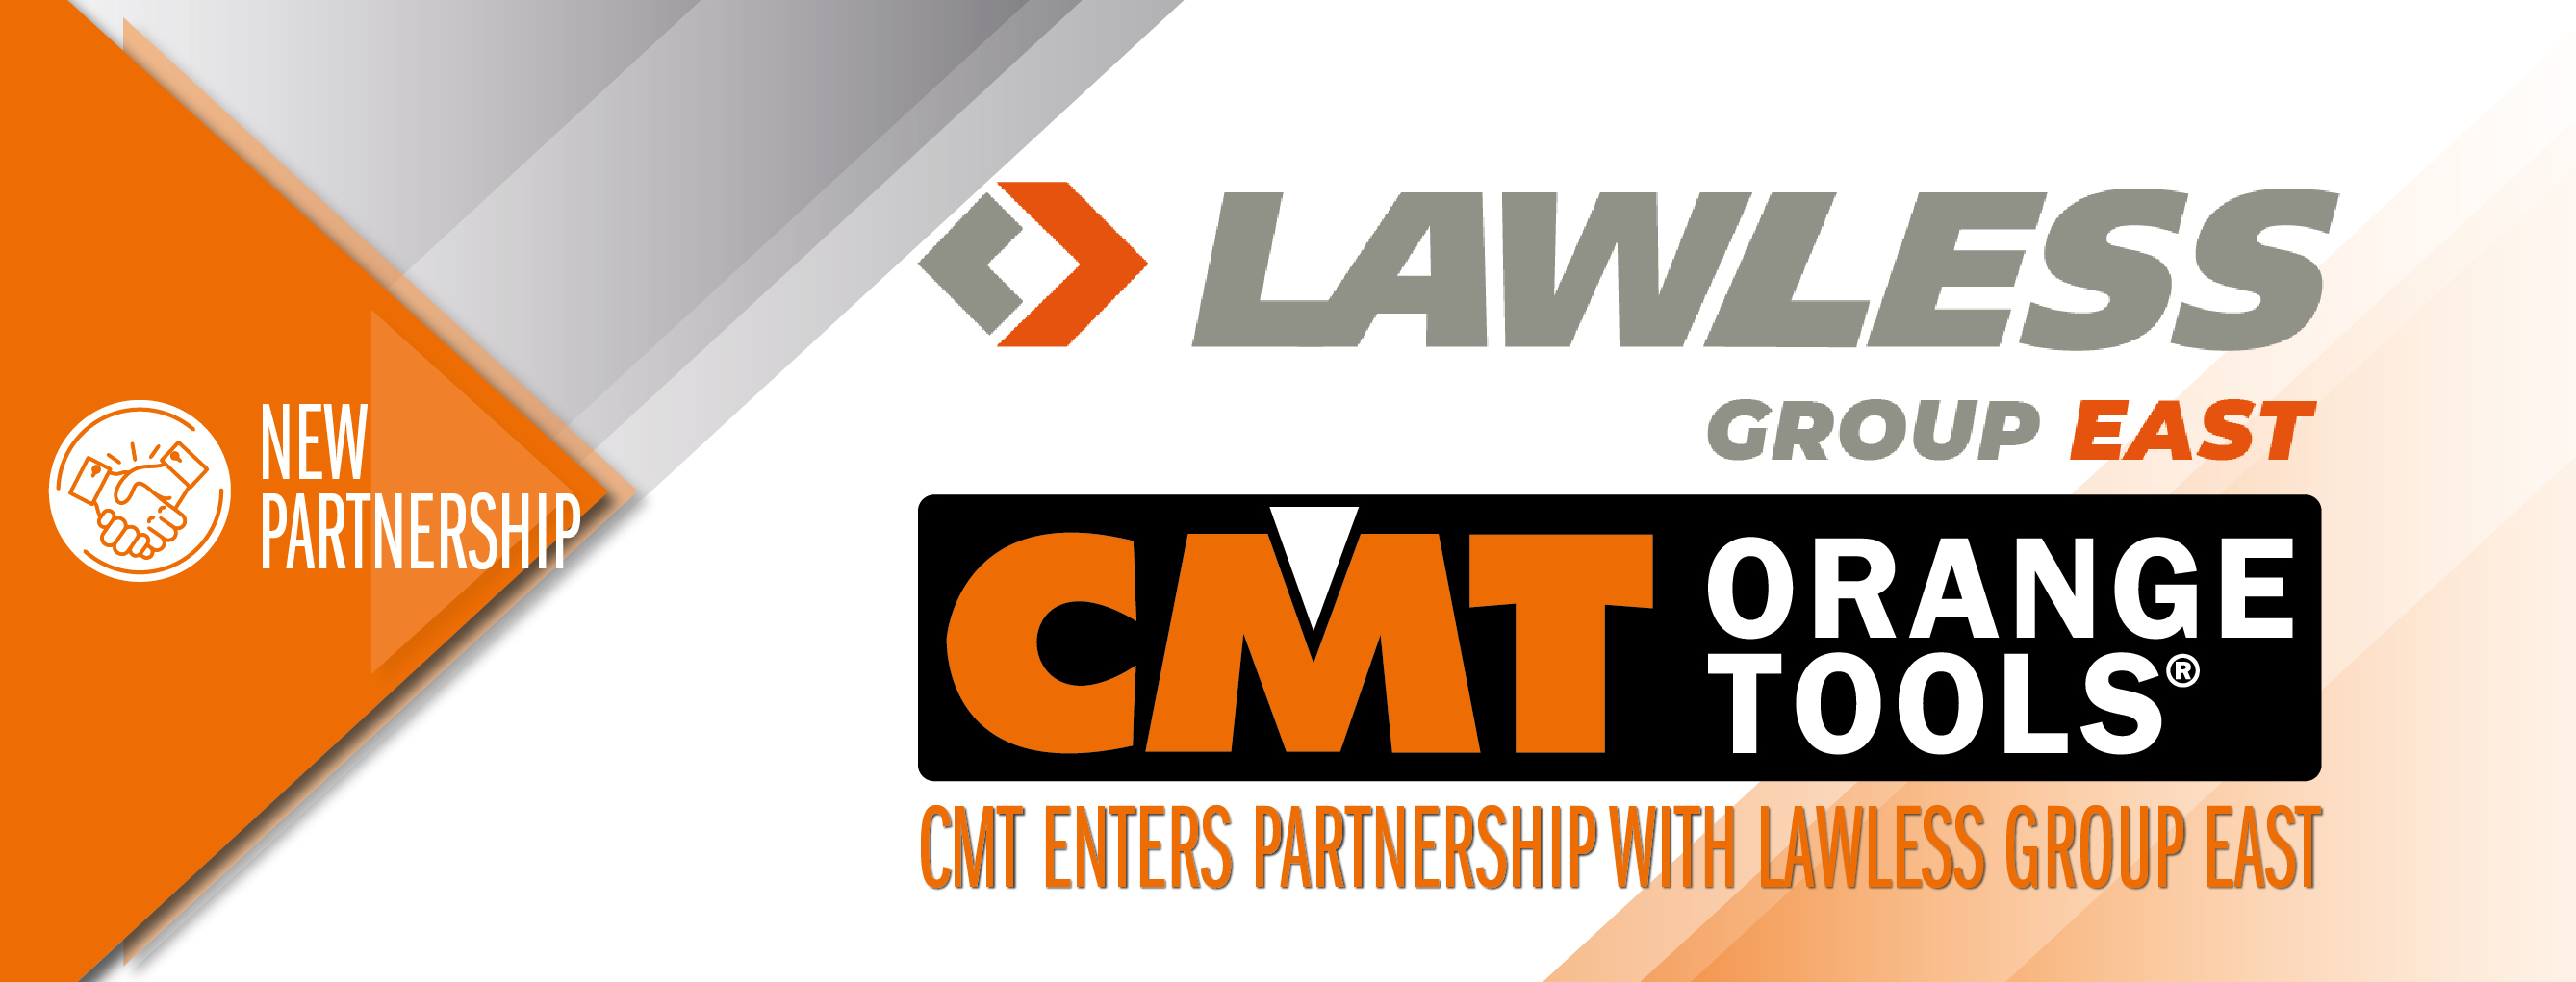 CMT Orange Tools in partnership with the Lawless Group